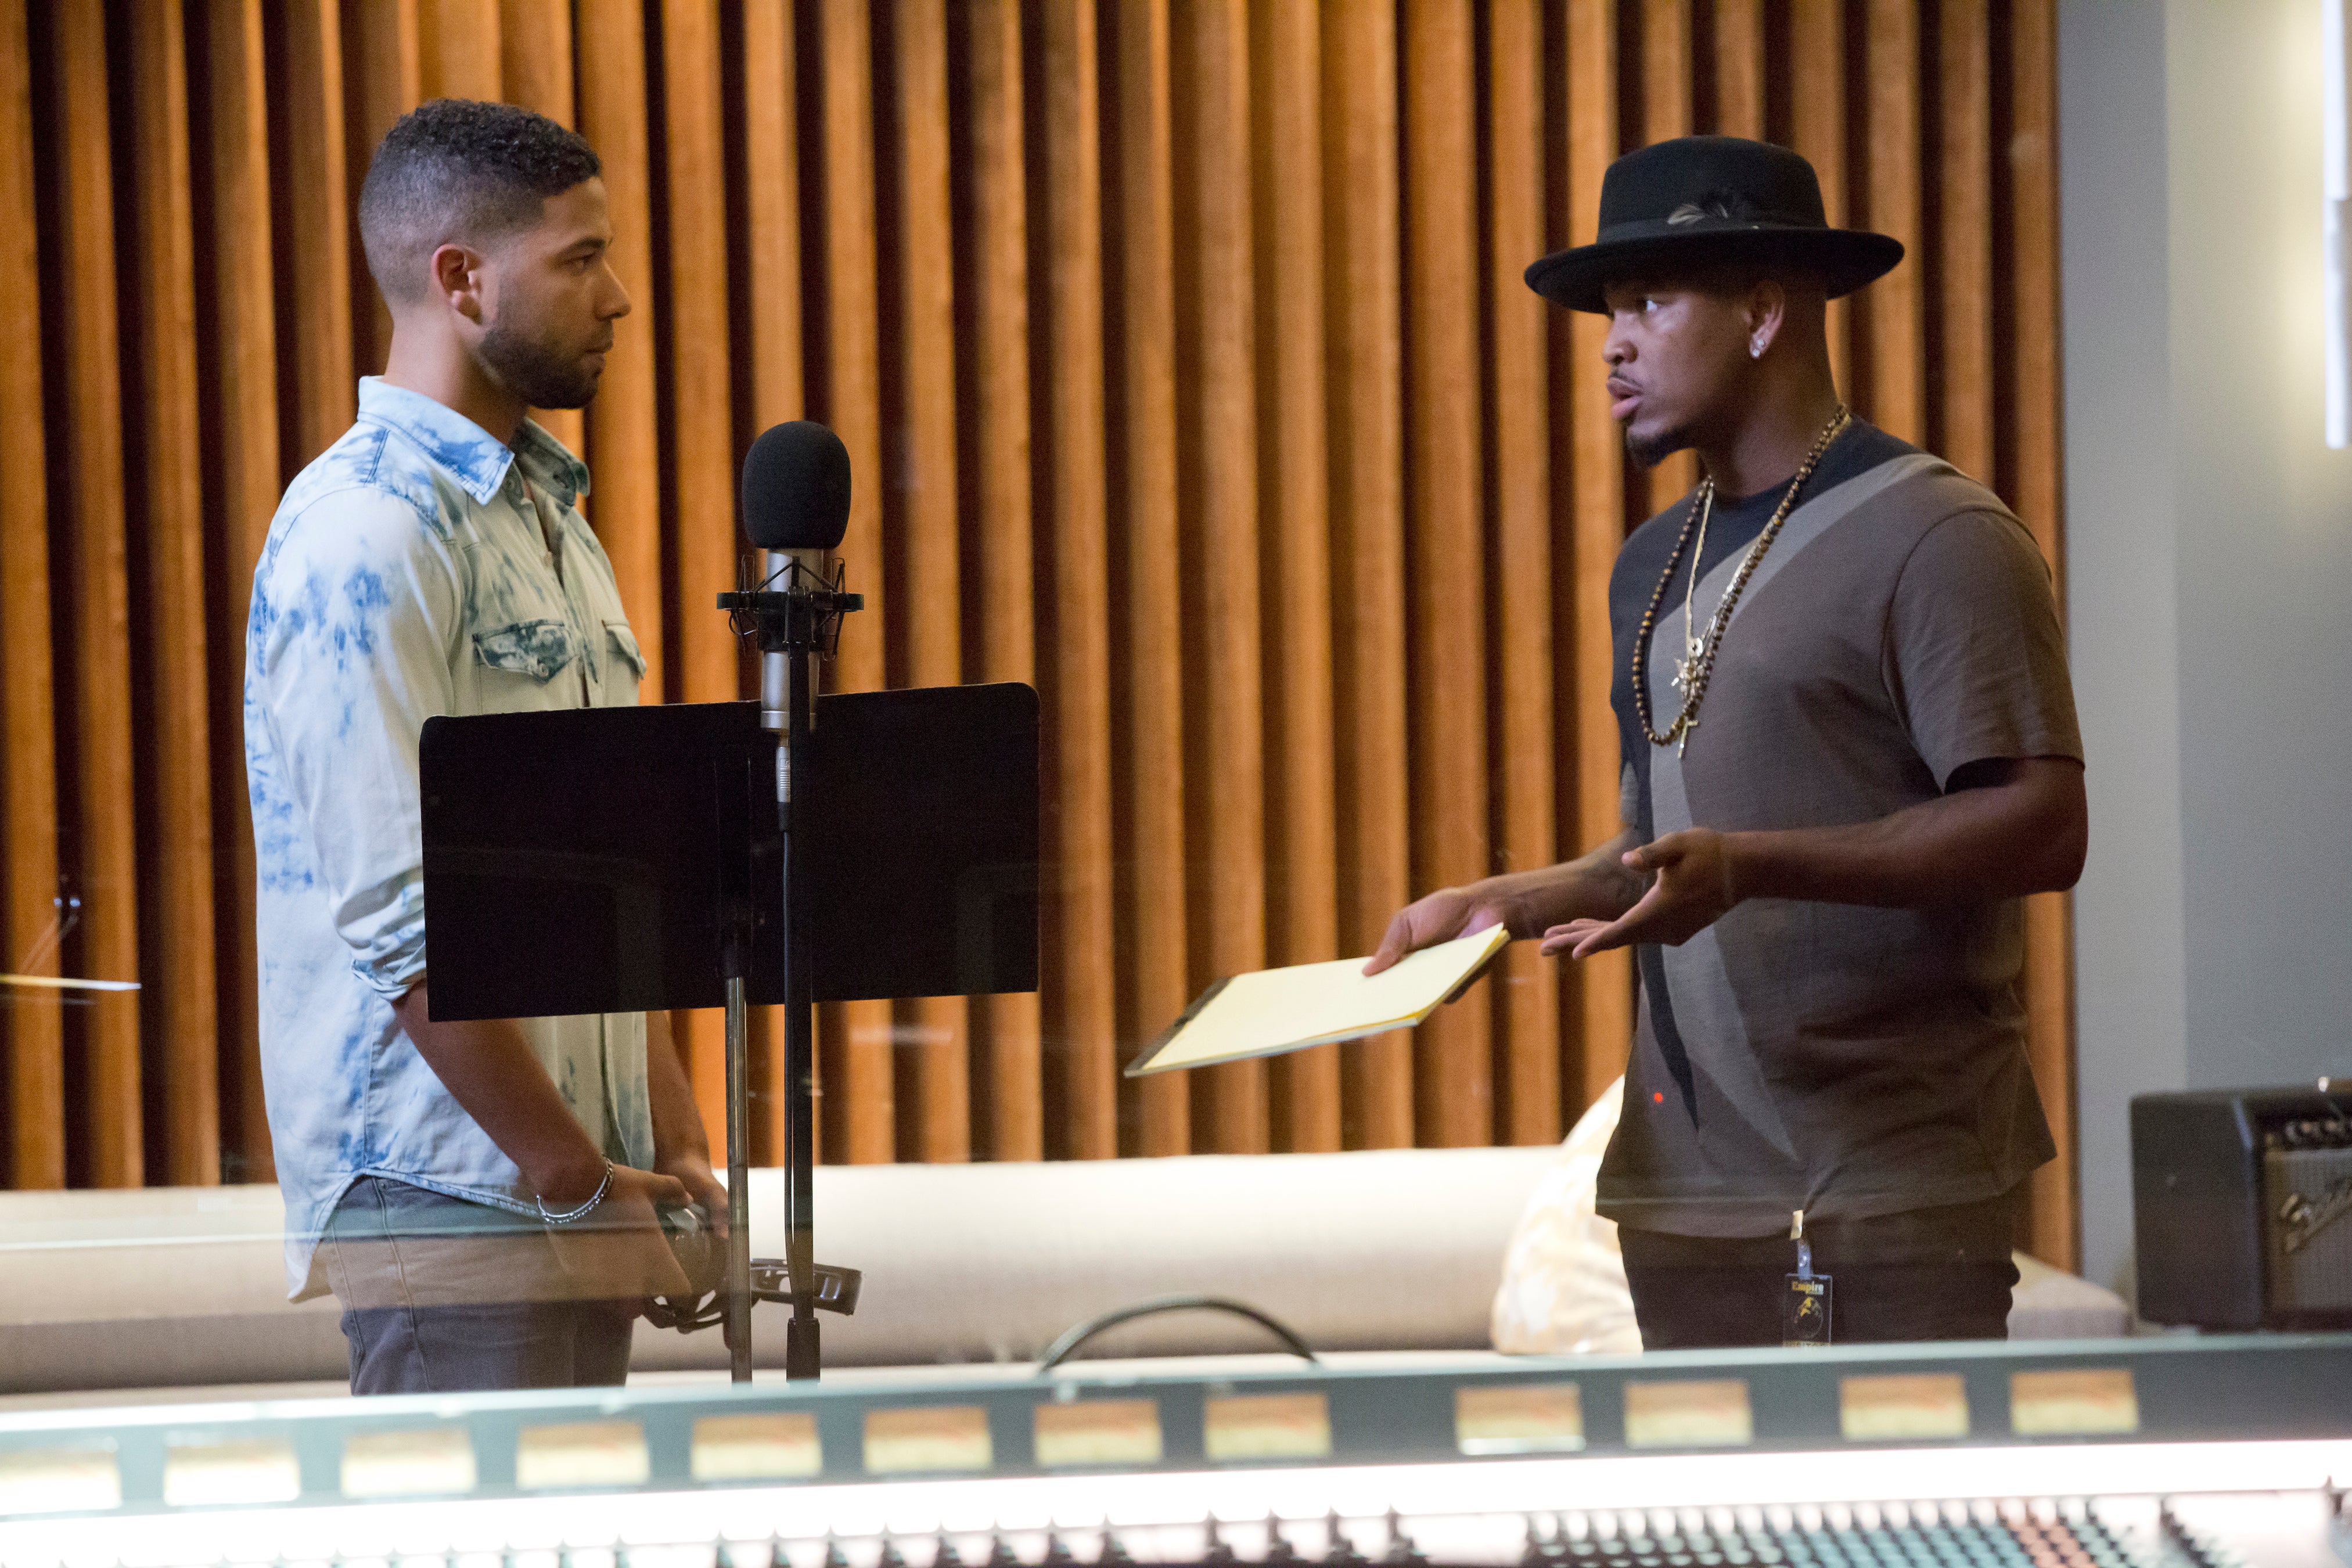 Get Your 'Empire' Fix with a Sneak Peek of Episode 5
